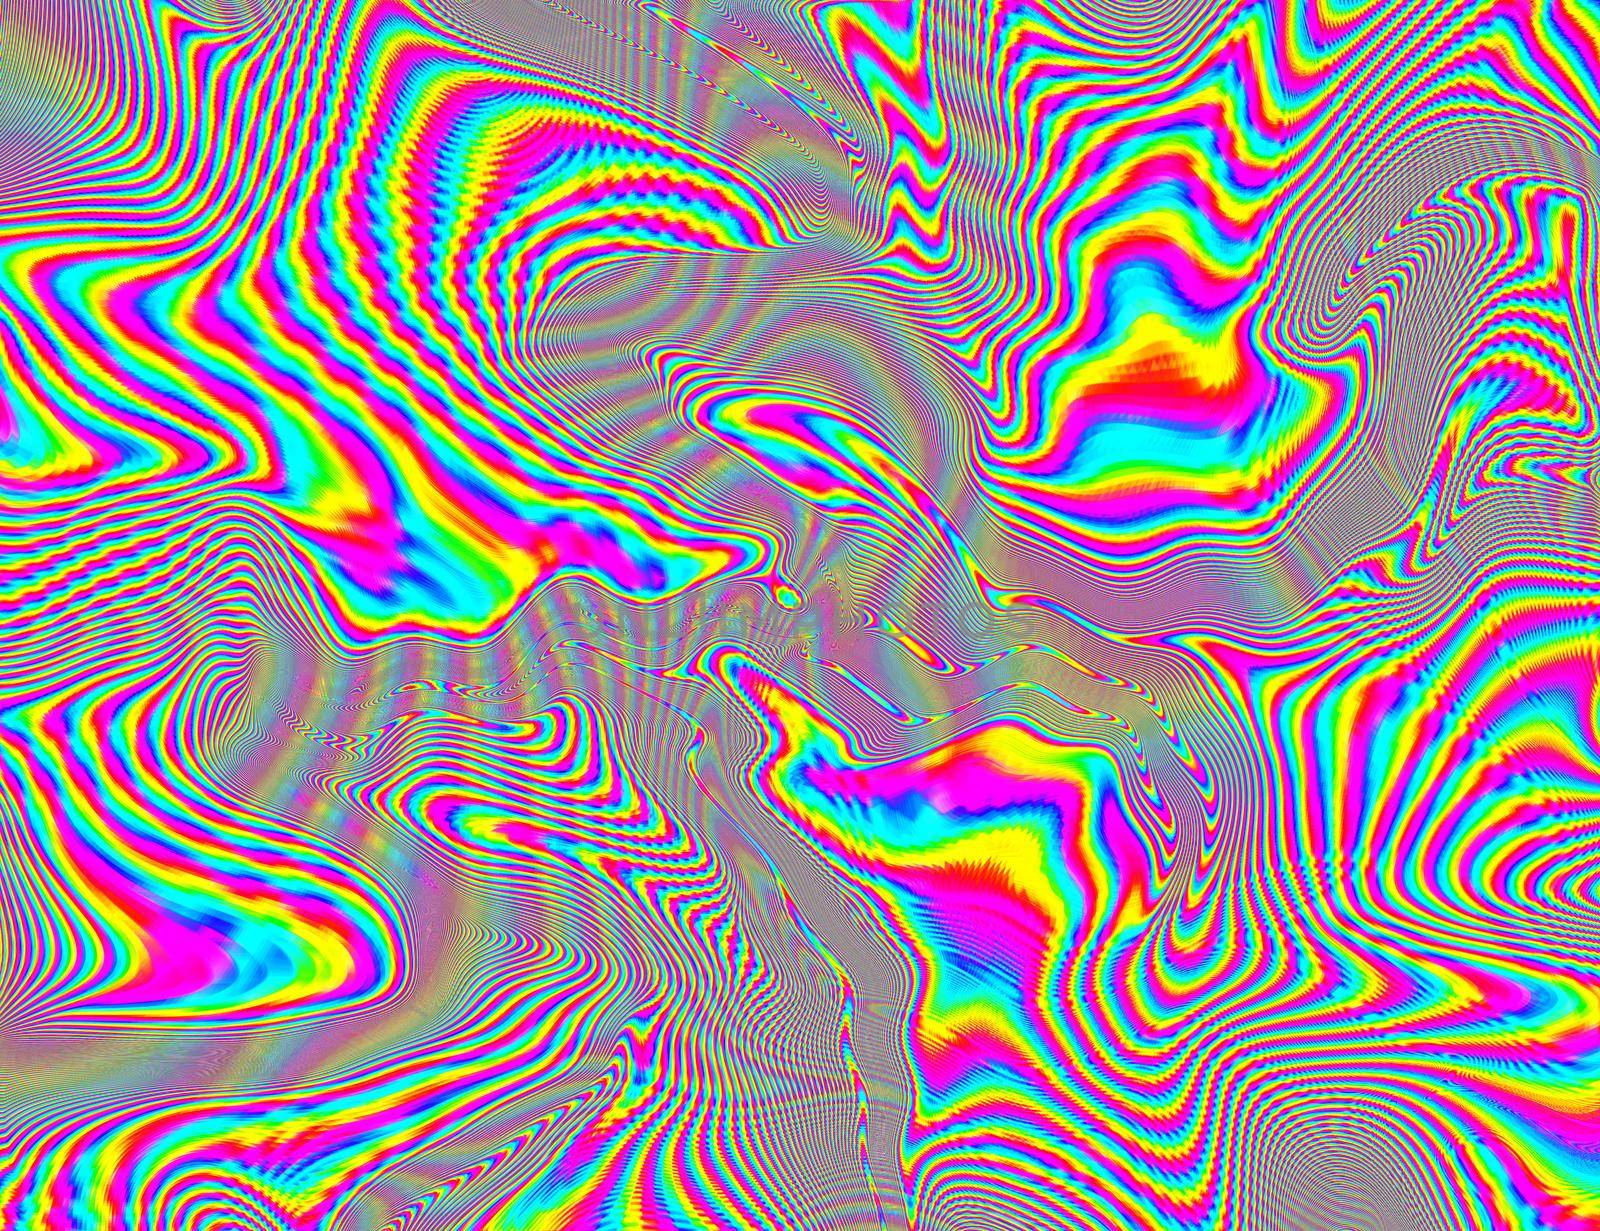 Hippie Trippy Psychedelic Rainbow Background LSD Colorful Wallpaper. Abstract Hypnotic Illusion. Hippie Retro Texture Glitch and Disco.